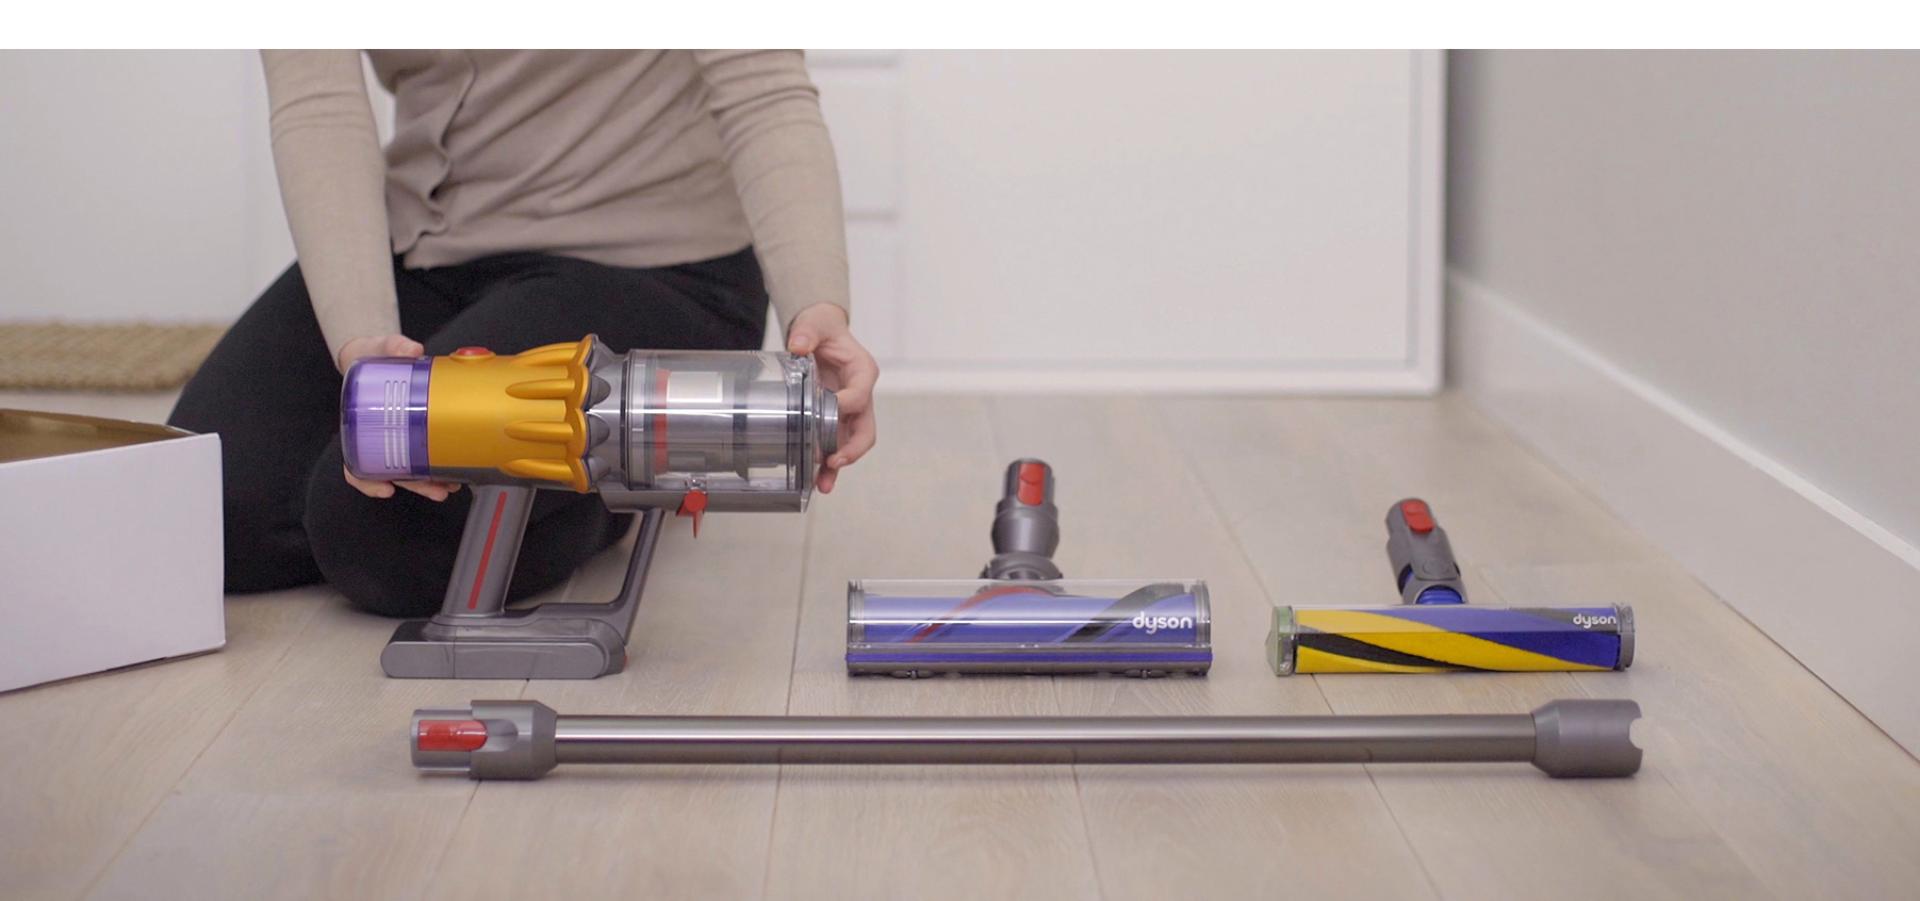 Someone holding the Dyson V12 Slim vacuum while it's resting on the floor.